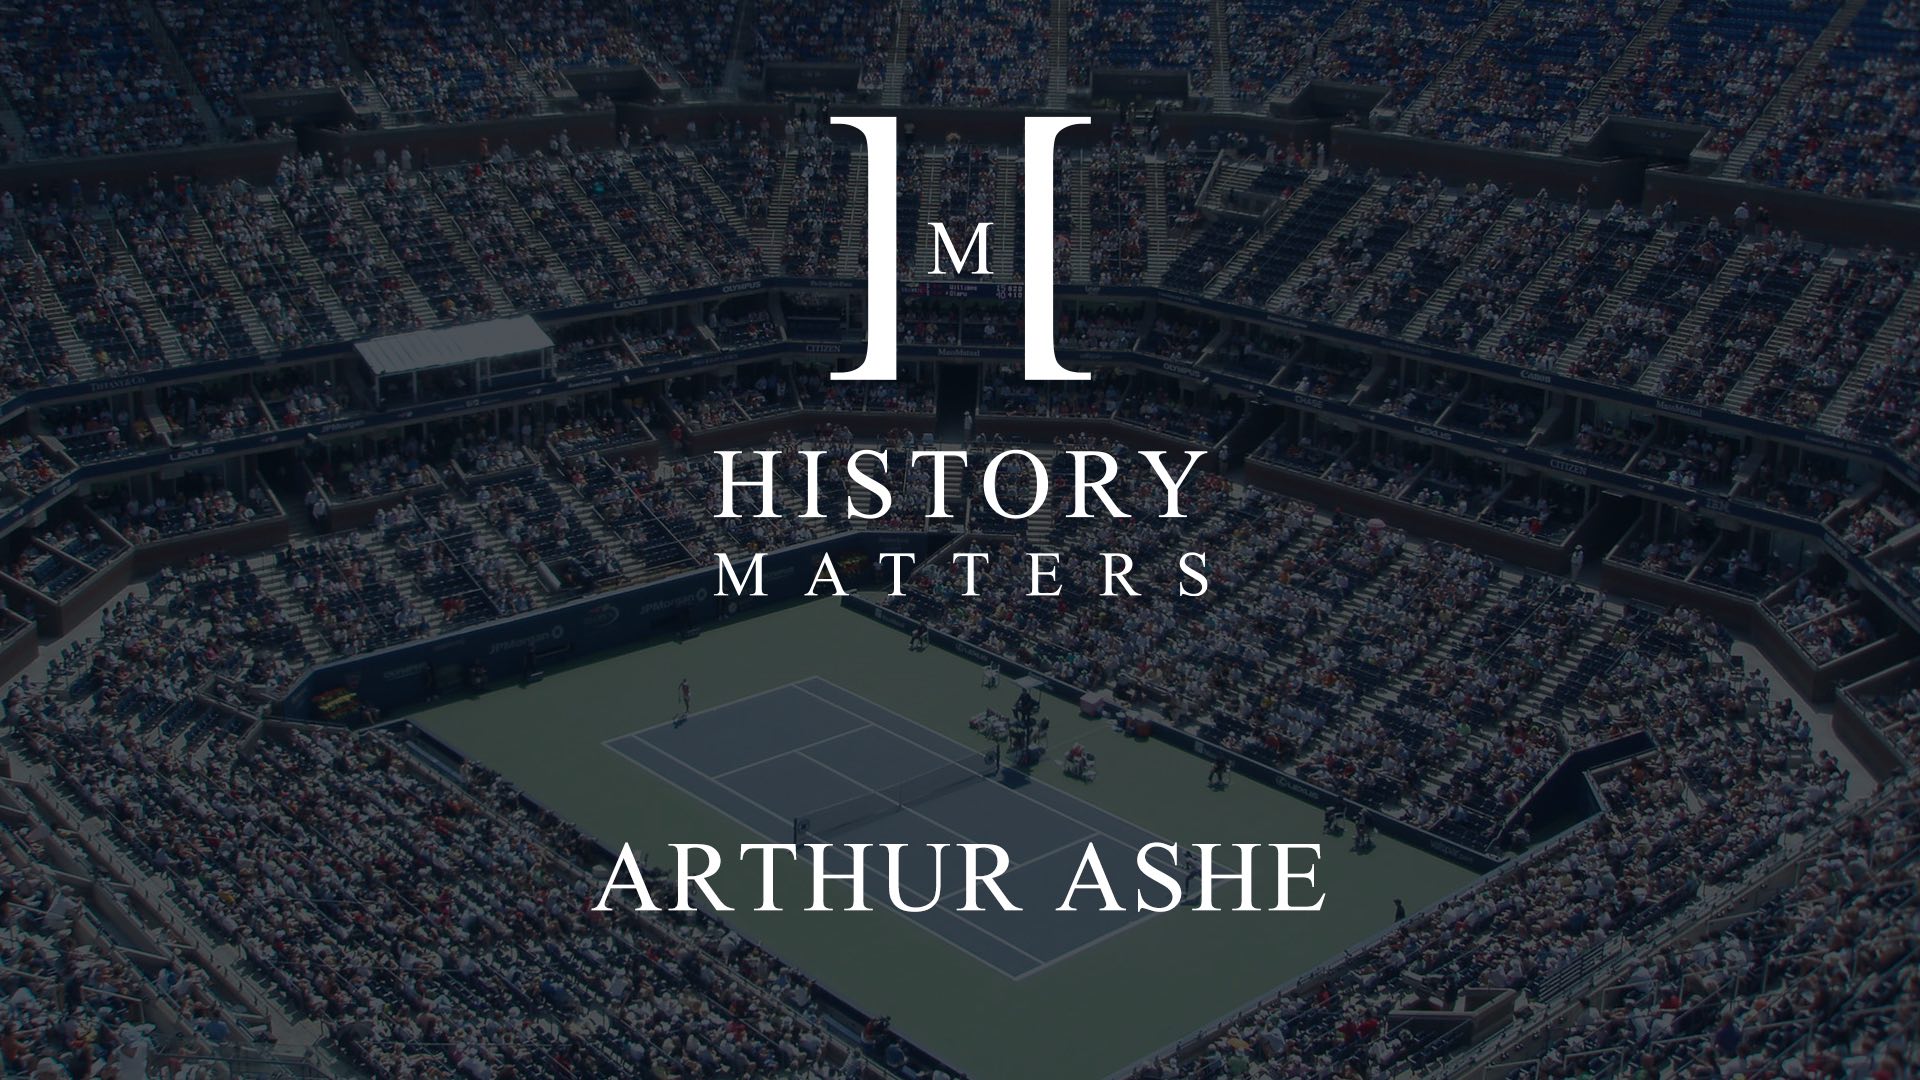 White History Matters Arthur Ashe logo with dimmed background of a tennis court in a stadium with players playing in front of a crowd